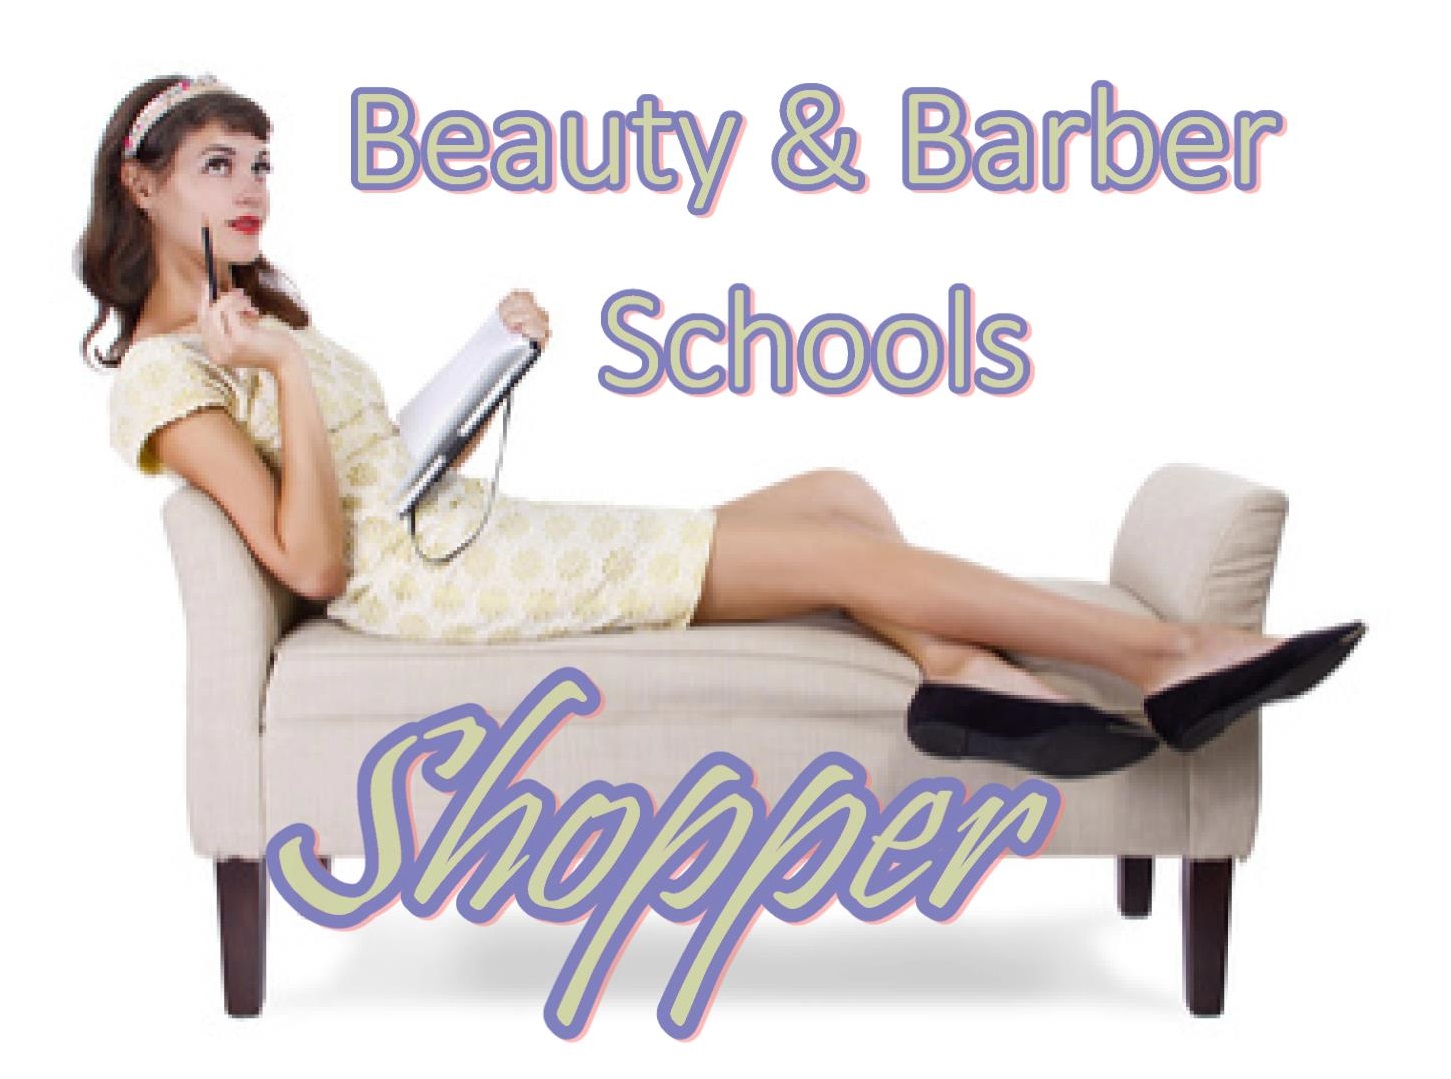 Search for beauty and barber schools, including esthetics, natural hair and nail technology